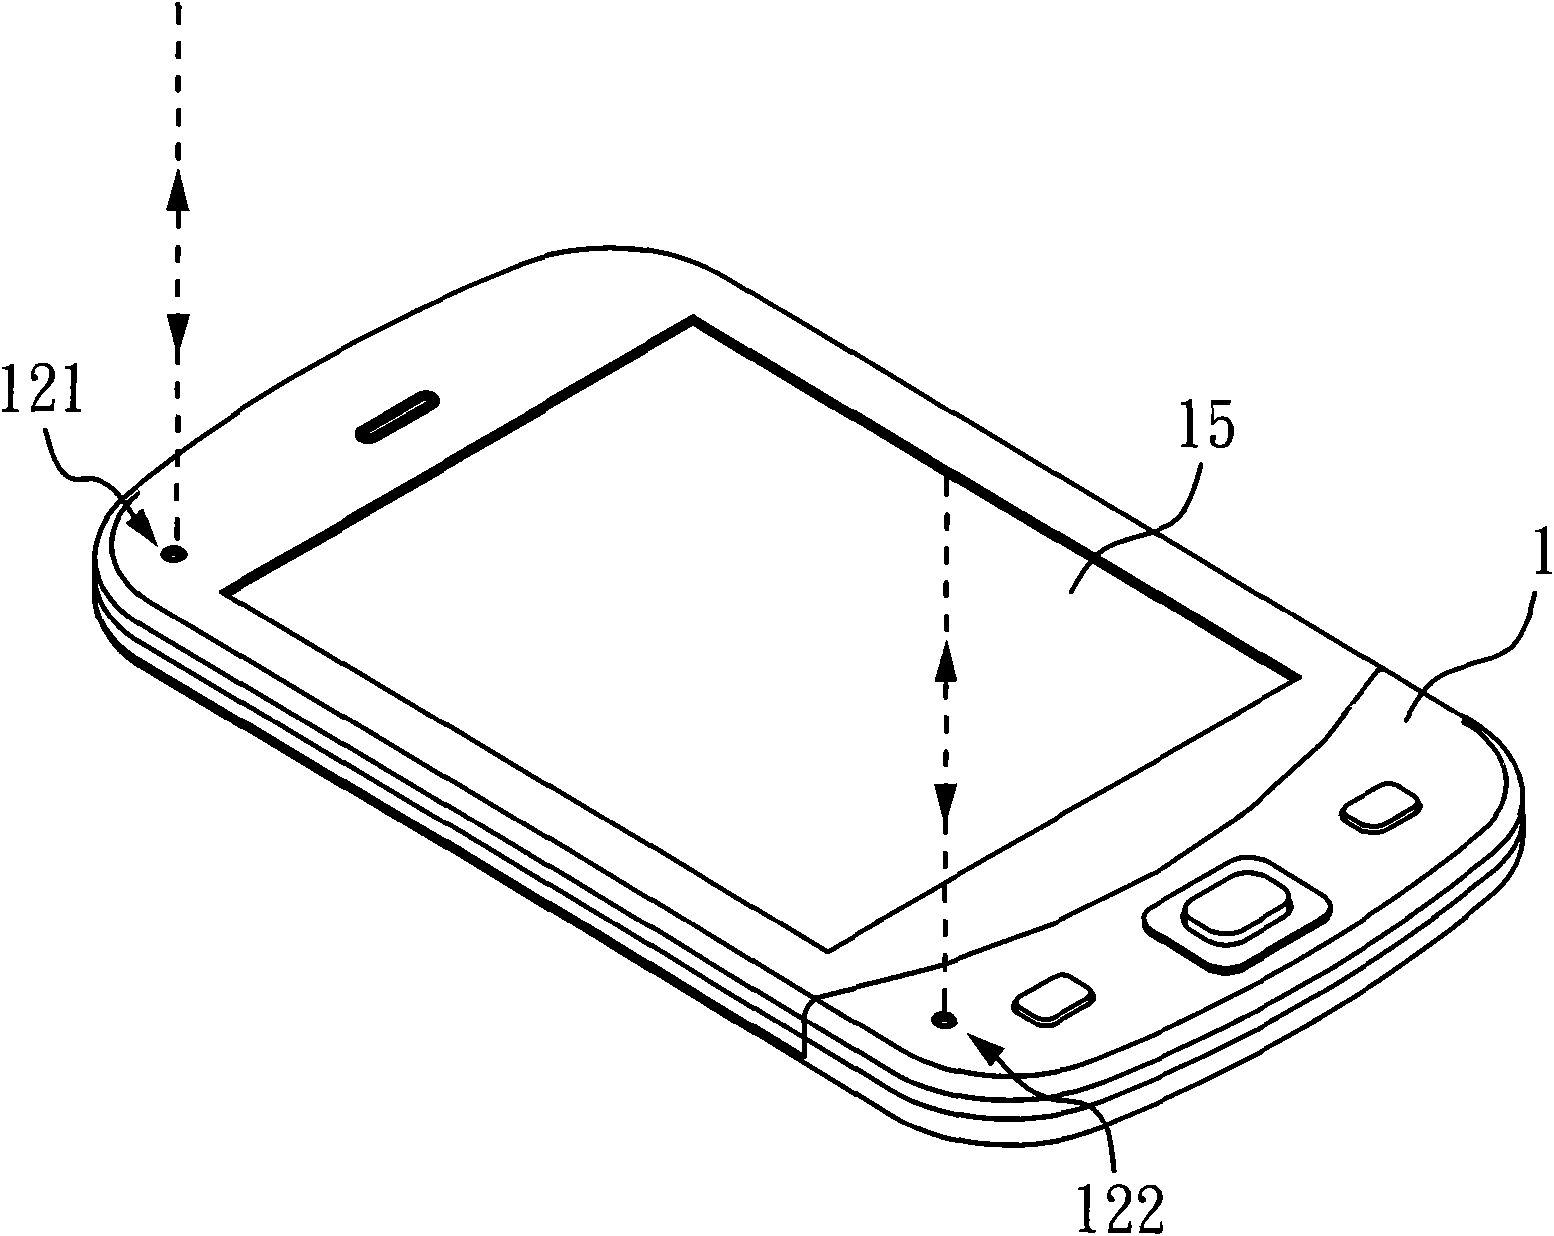 Method for detecting distance changes to execute commands and portable electronic device